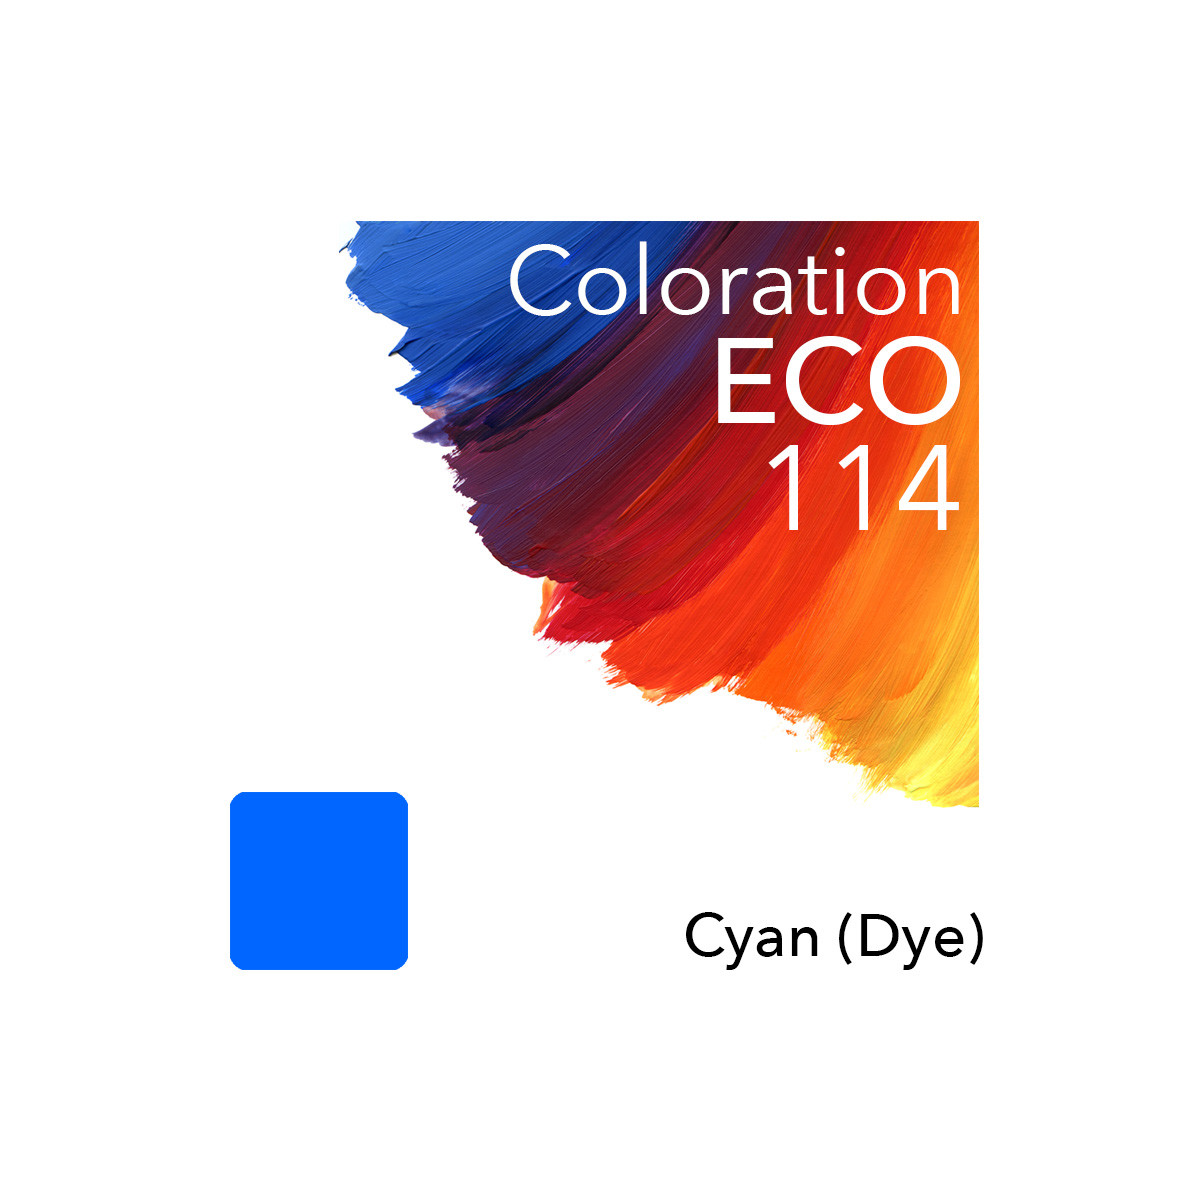 Coloration ECO compatible to Epson 114 C (Cyan)